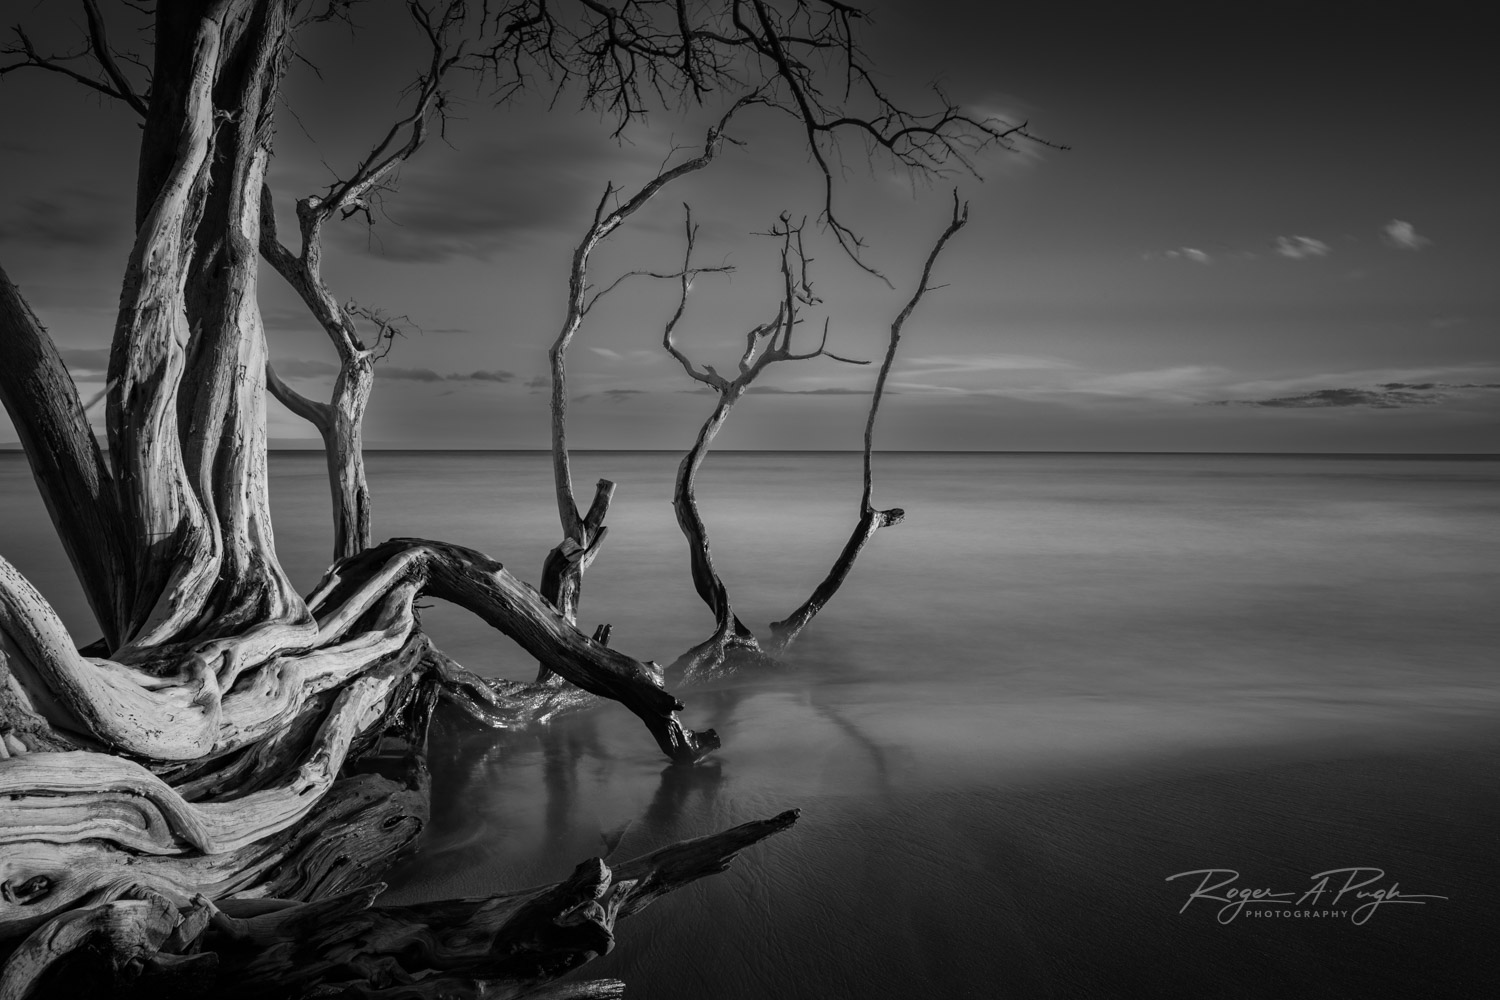 A long exposure at the end of the day makes for this beautiful shot of a tree that ebbs and flows with the tide on the beach.